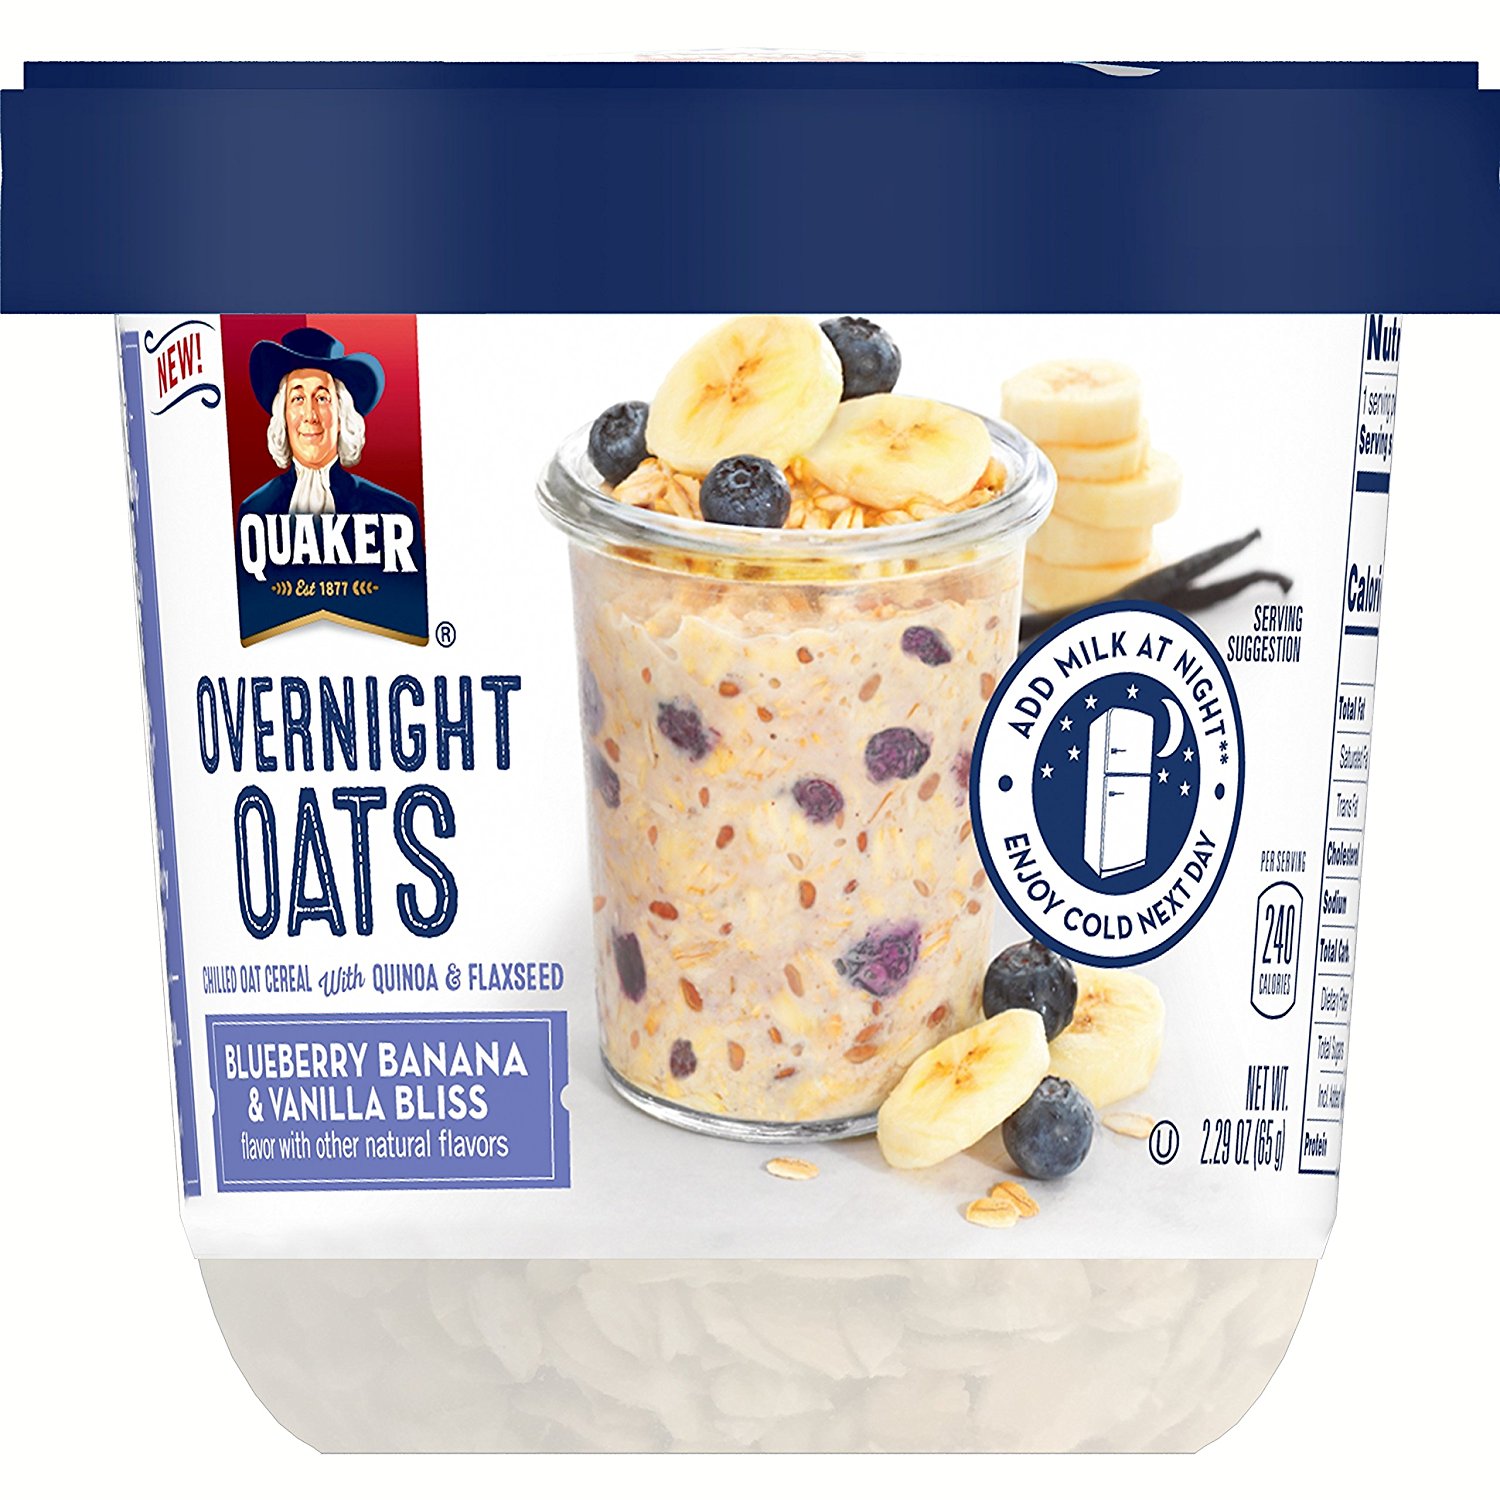 Quaker, Overnight Oats, Chilled Oat Cereal - 2.57 oz (73 g) *Select Flavor